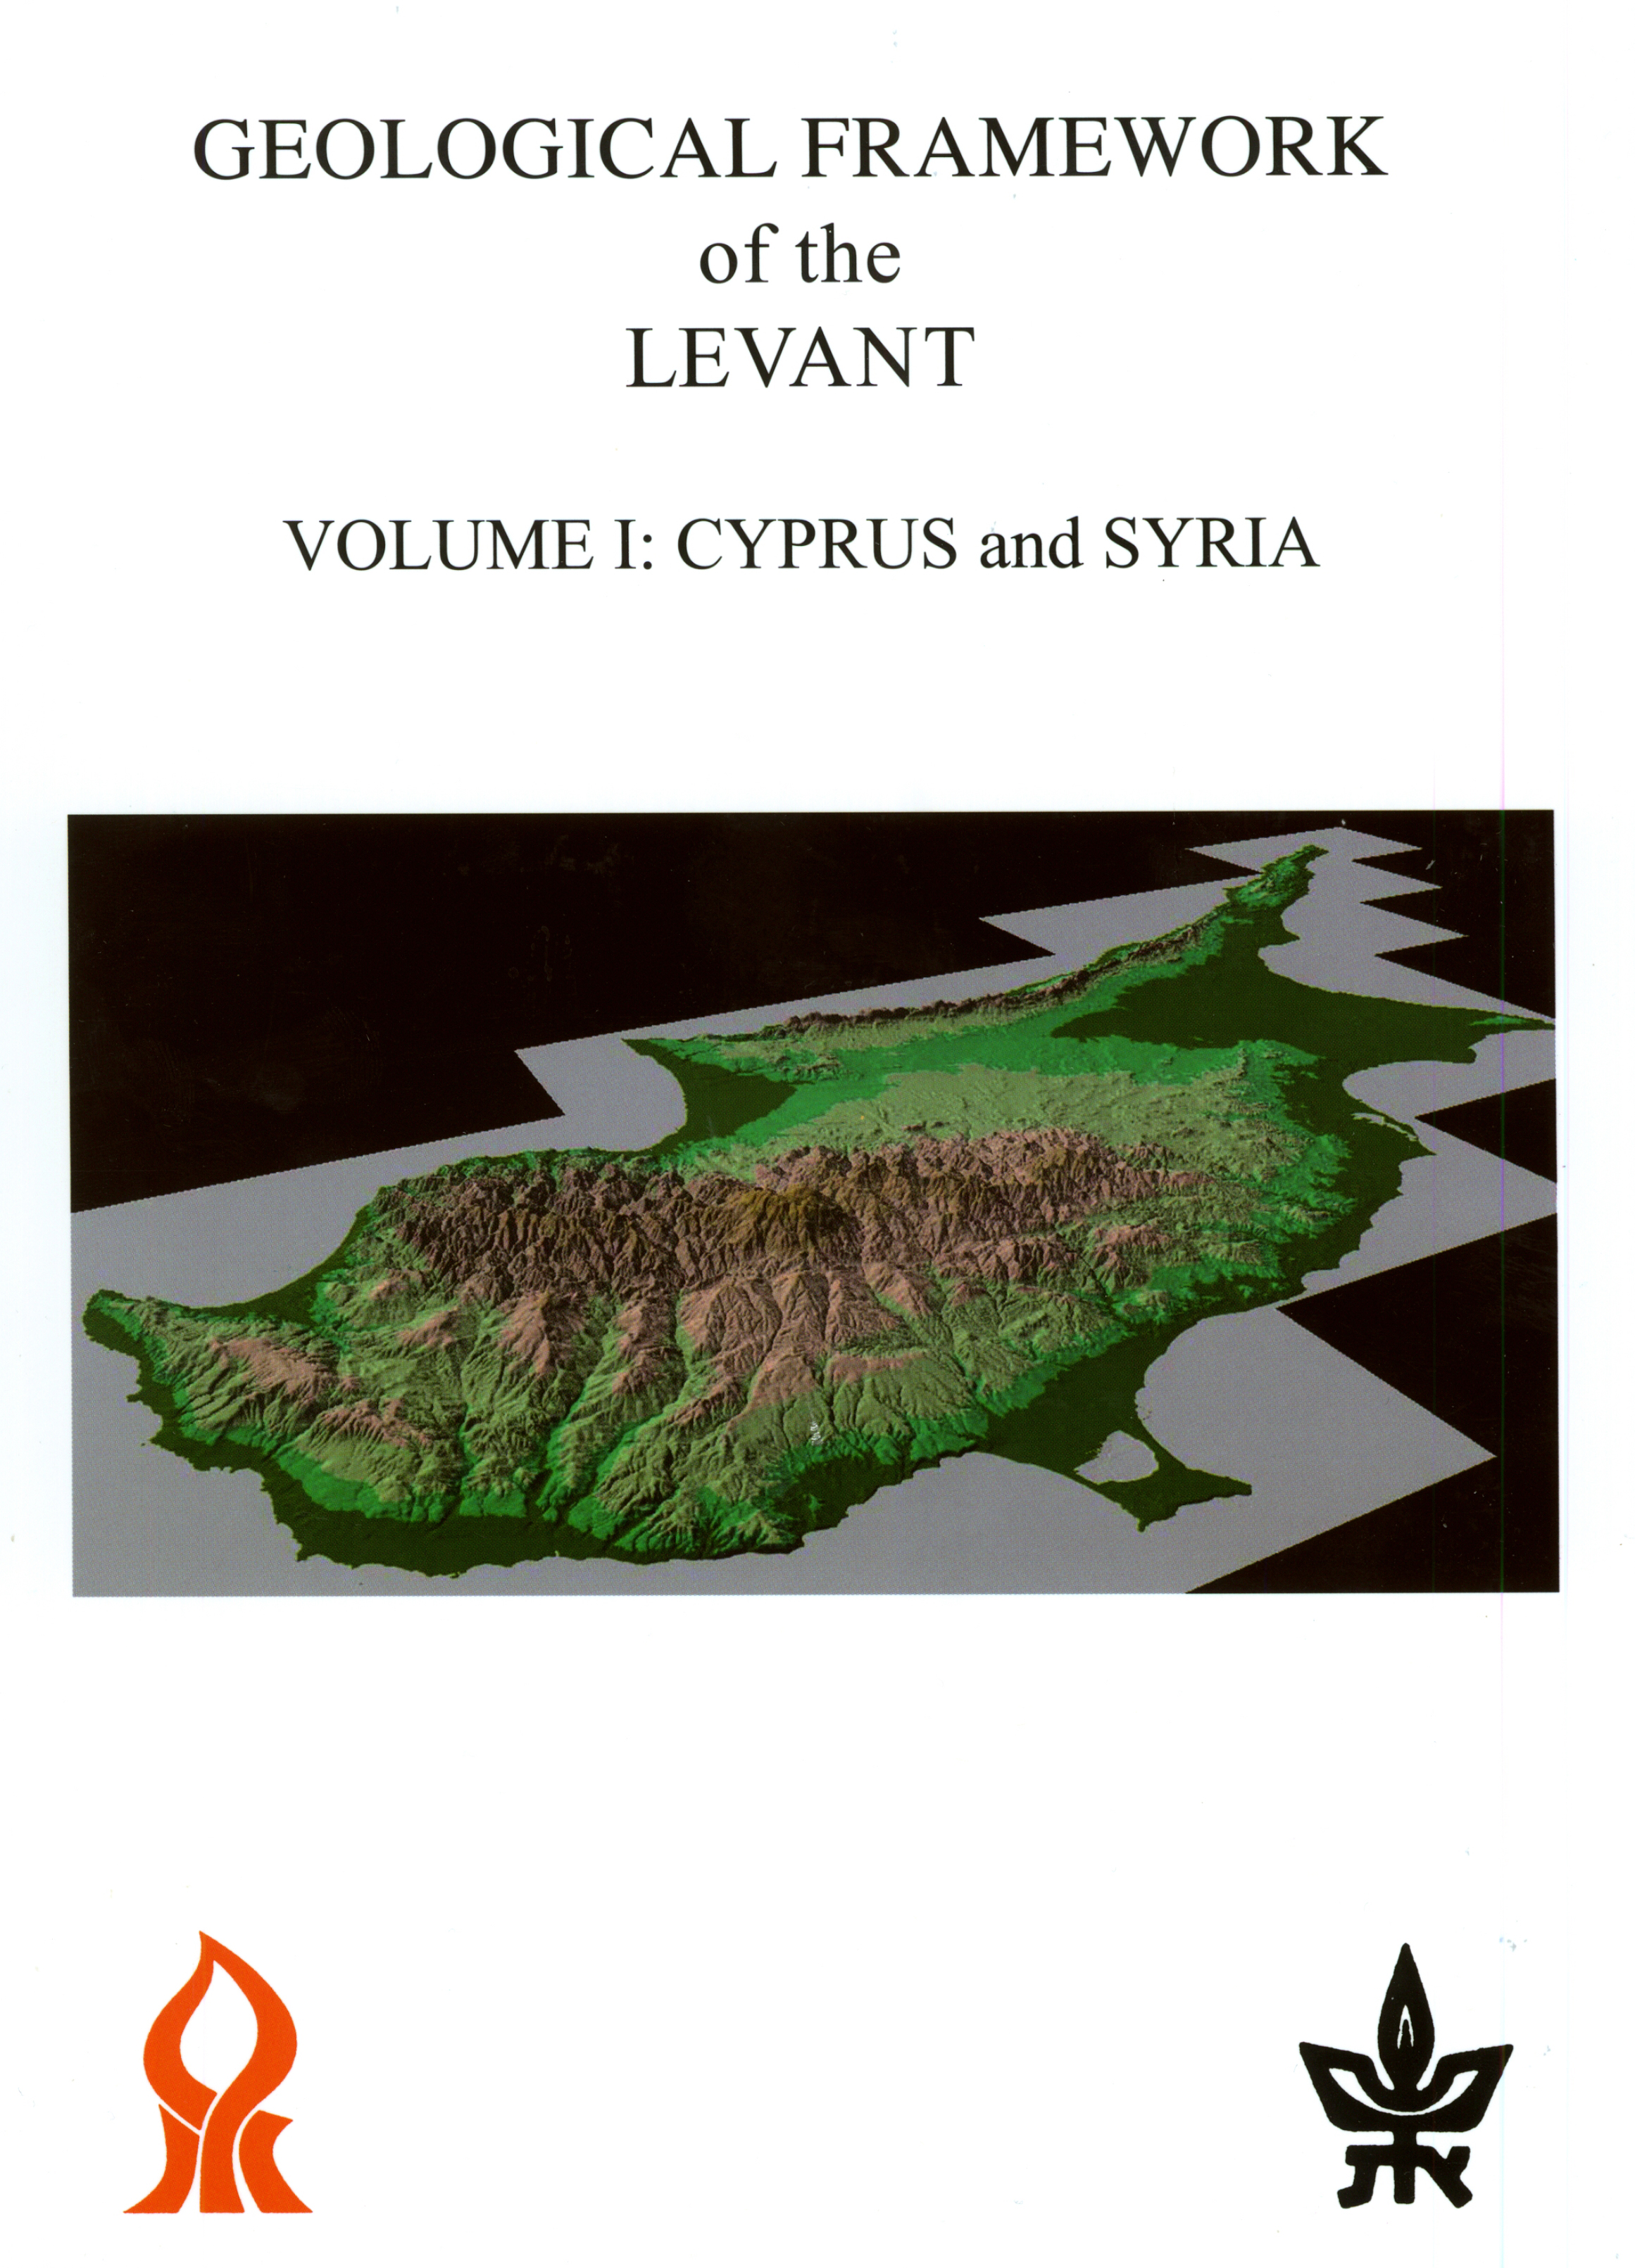 Geological Framework of the Levant.<br>Volume 1: Cyprus and Syria